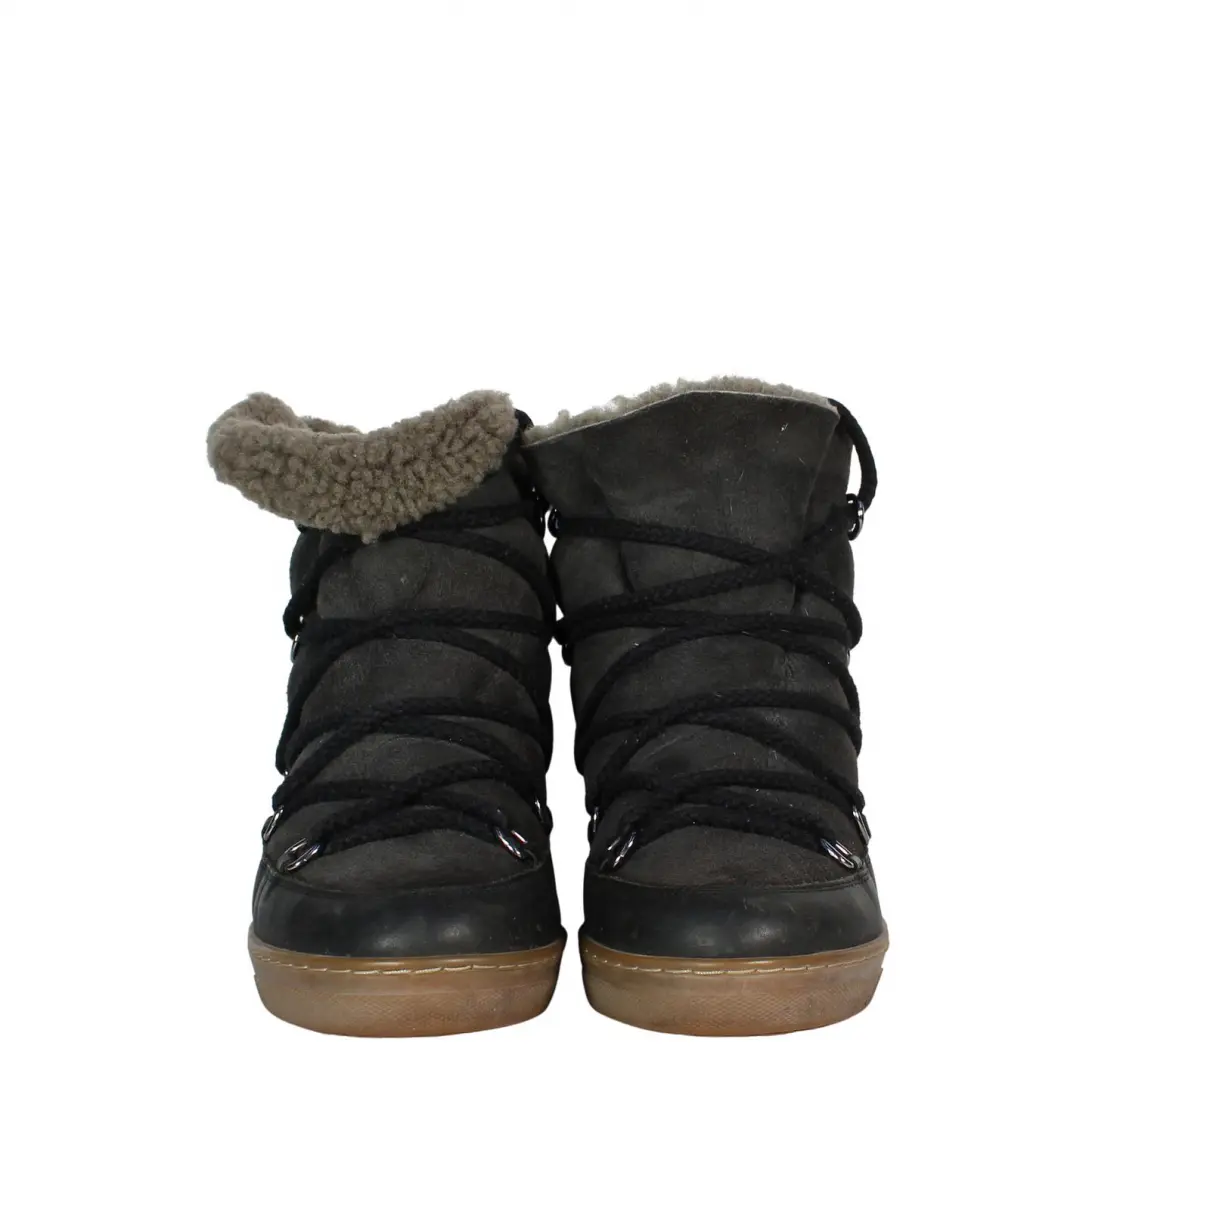 Buy Isabel Marant Nowles leather ankle boots online